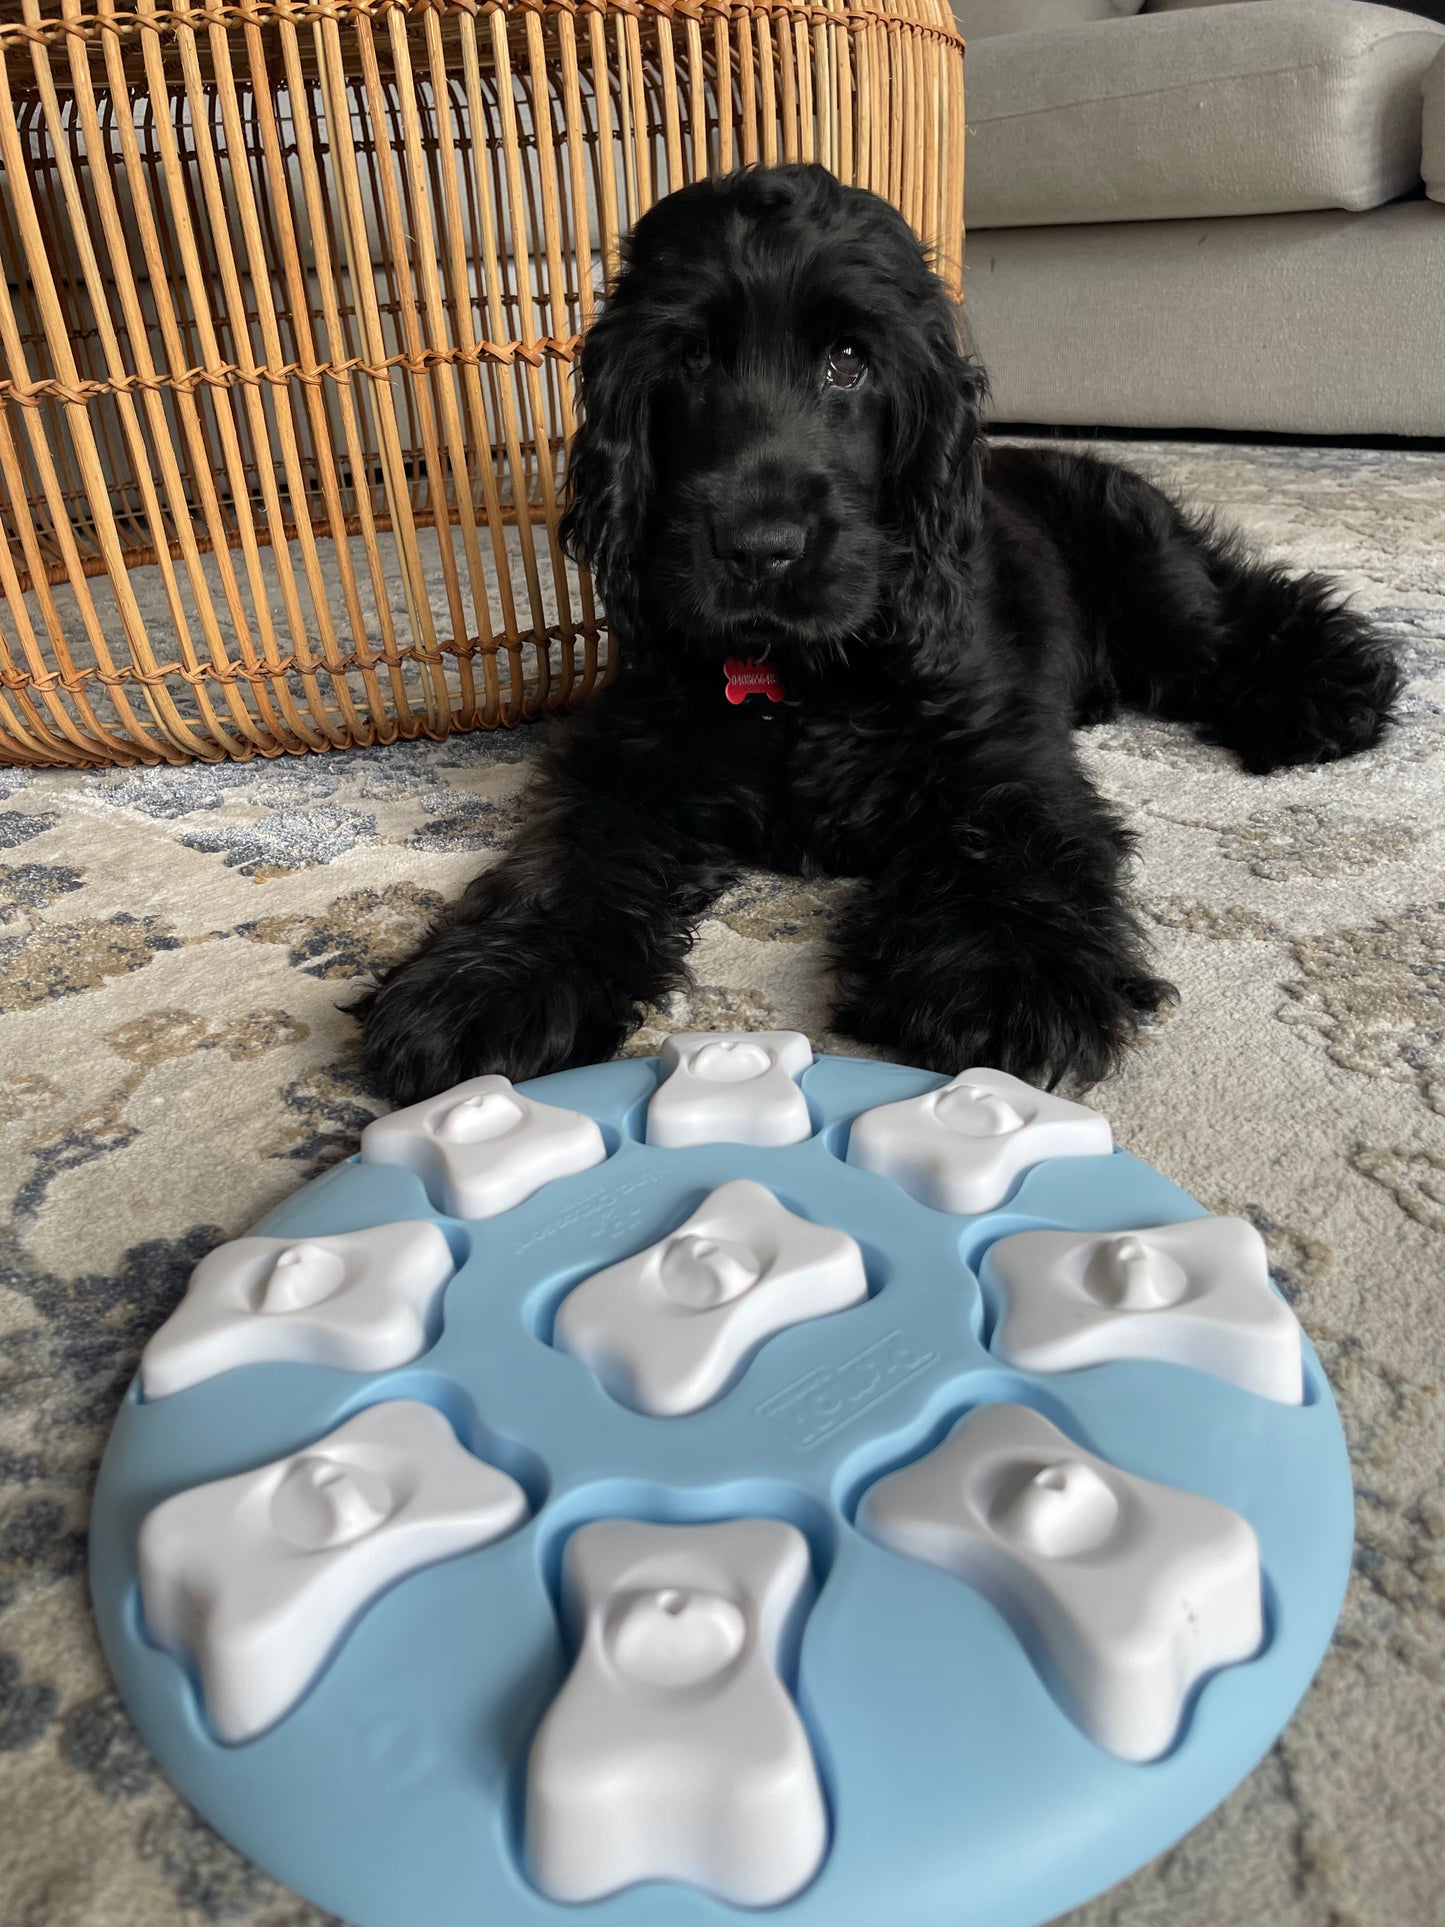 Nina Ottosson Smart Interactive Puzzle Dog Toy for Puppies - Level 1 –  Tails and Treats